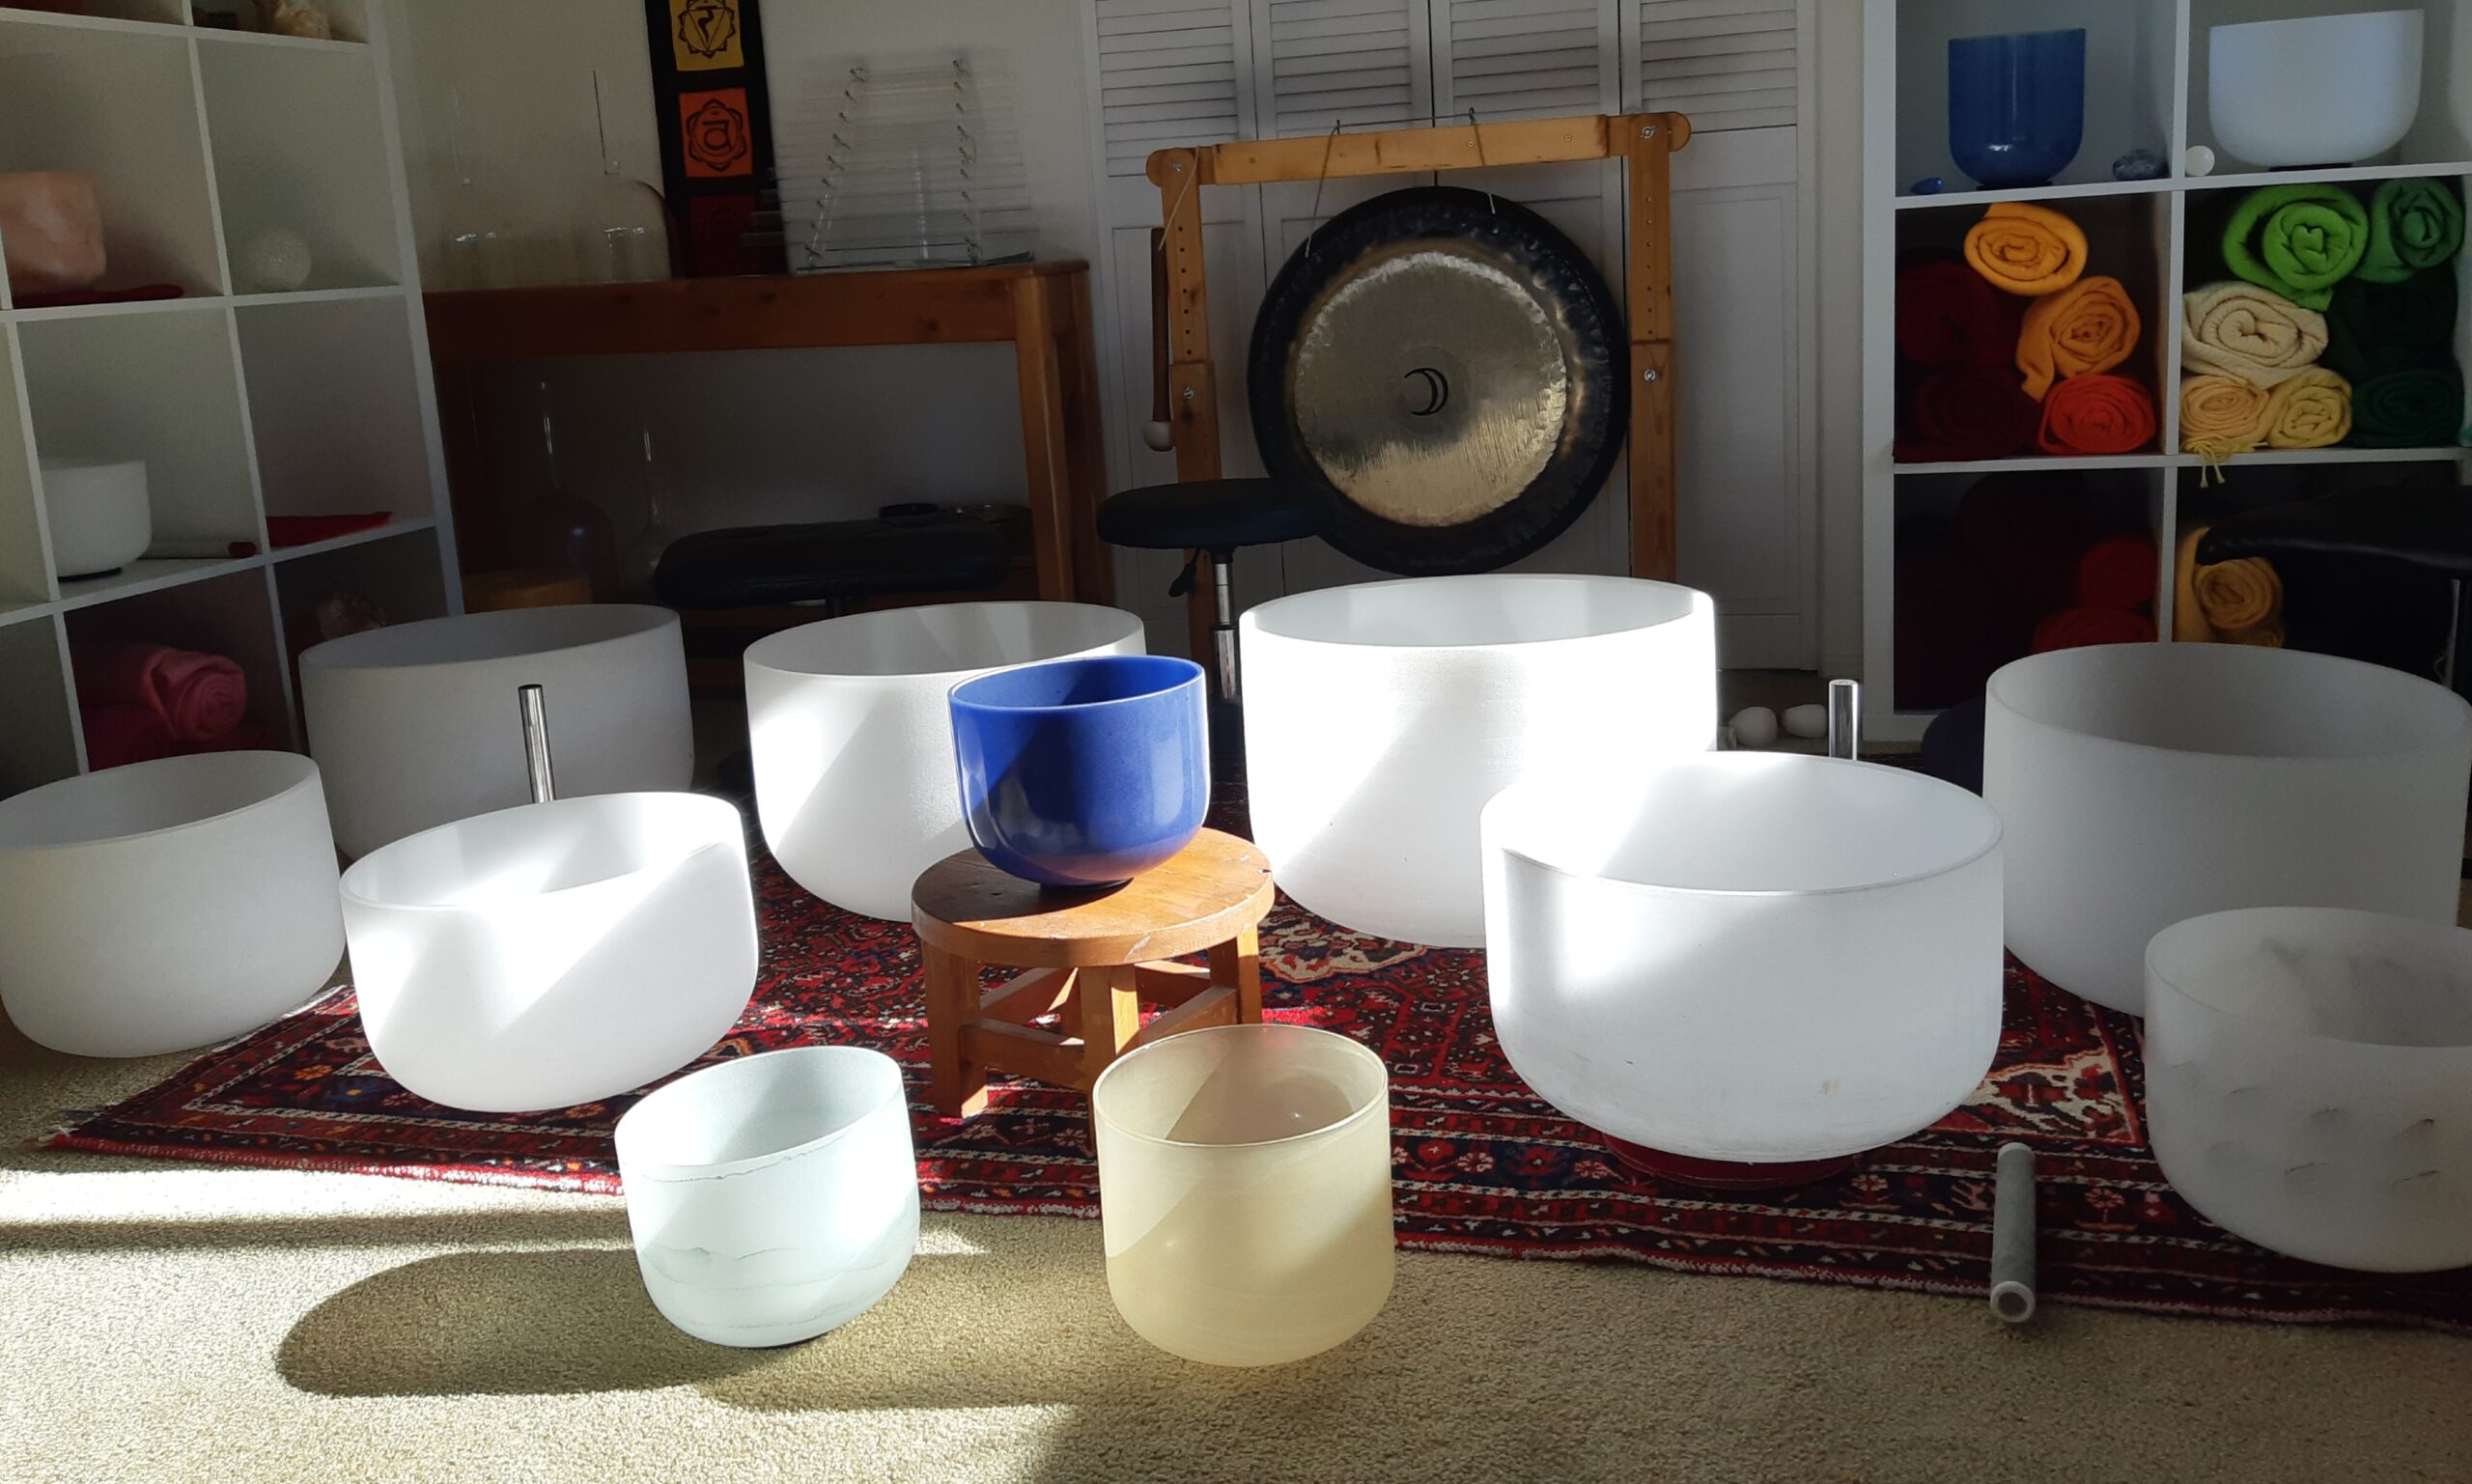 15 Crystal Bowls Sound Healing Experience Saturday, June 4th, 10 am – 12 pm